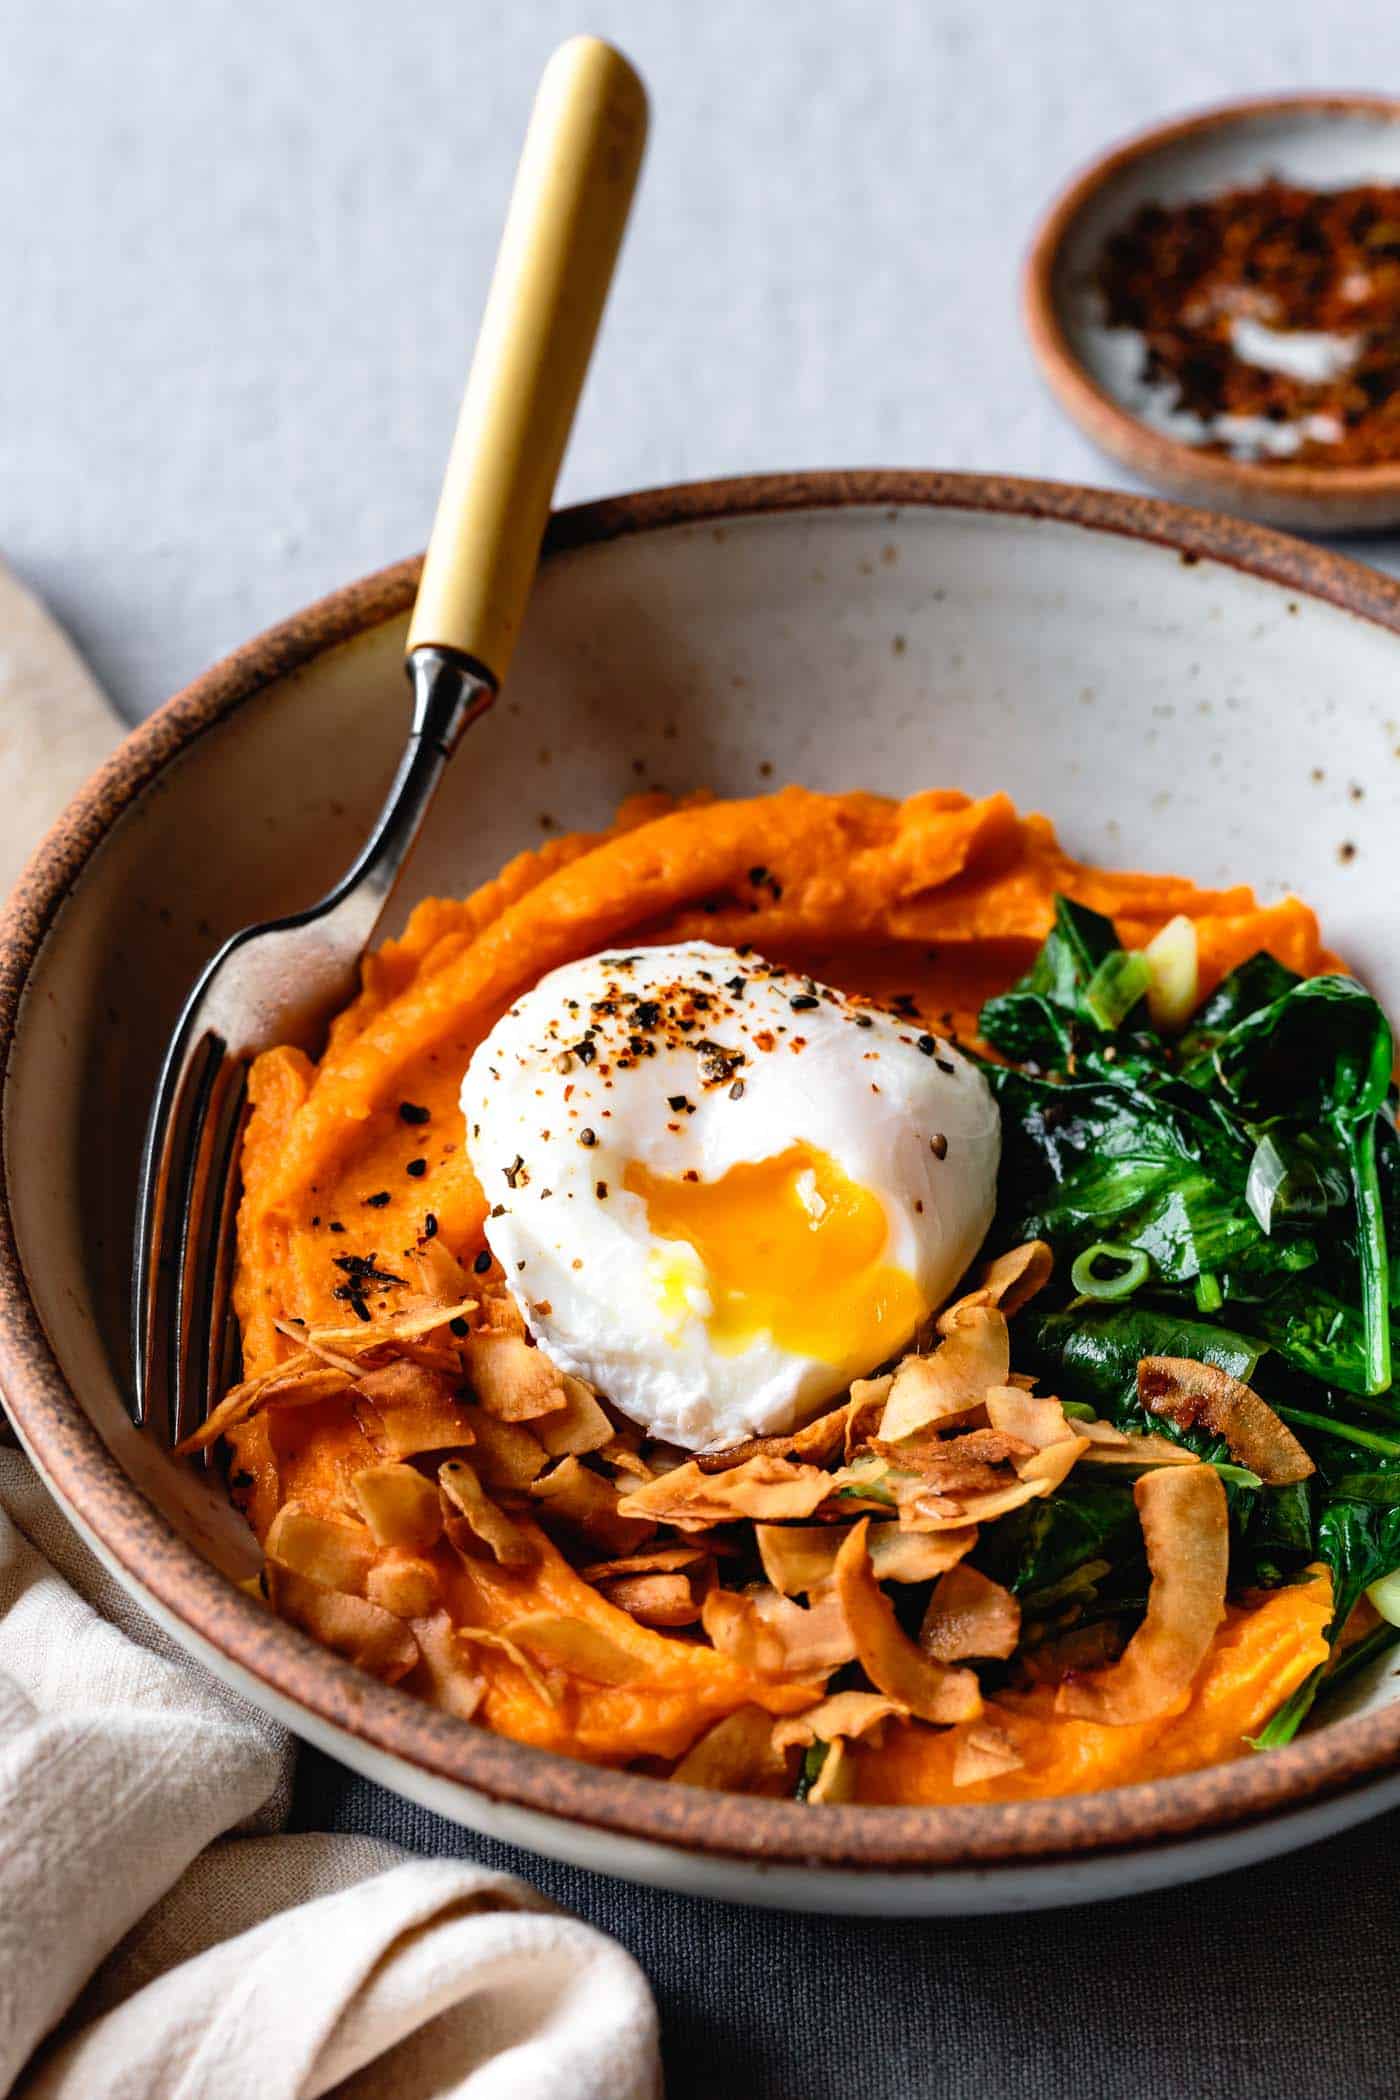 Serving healthy breakfast recipe with sweet potatoes - sweet potato bowl with eggs and greens